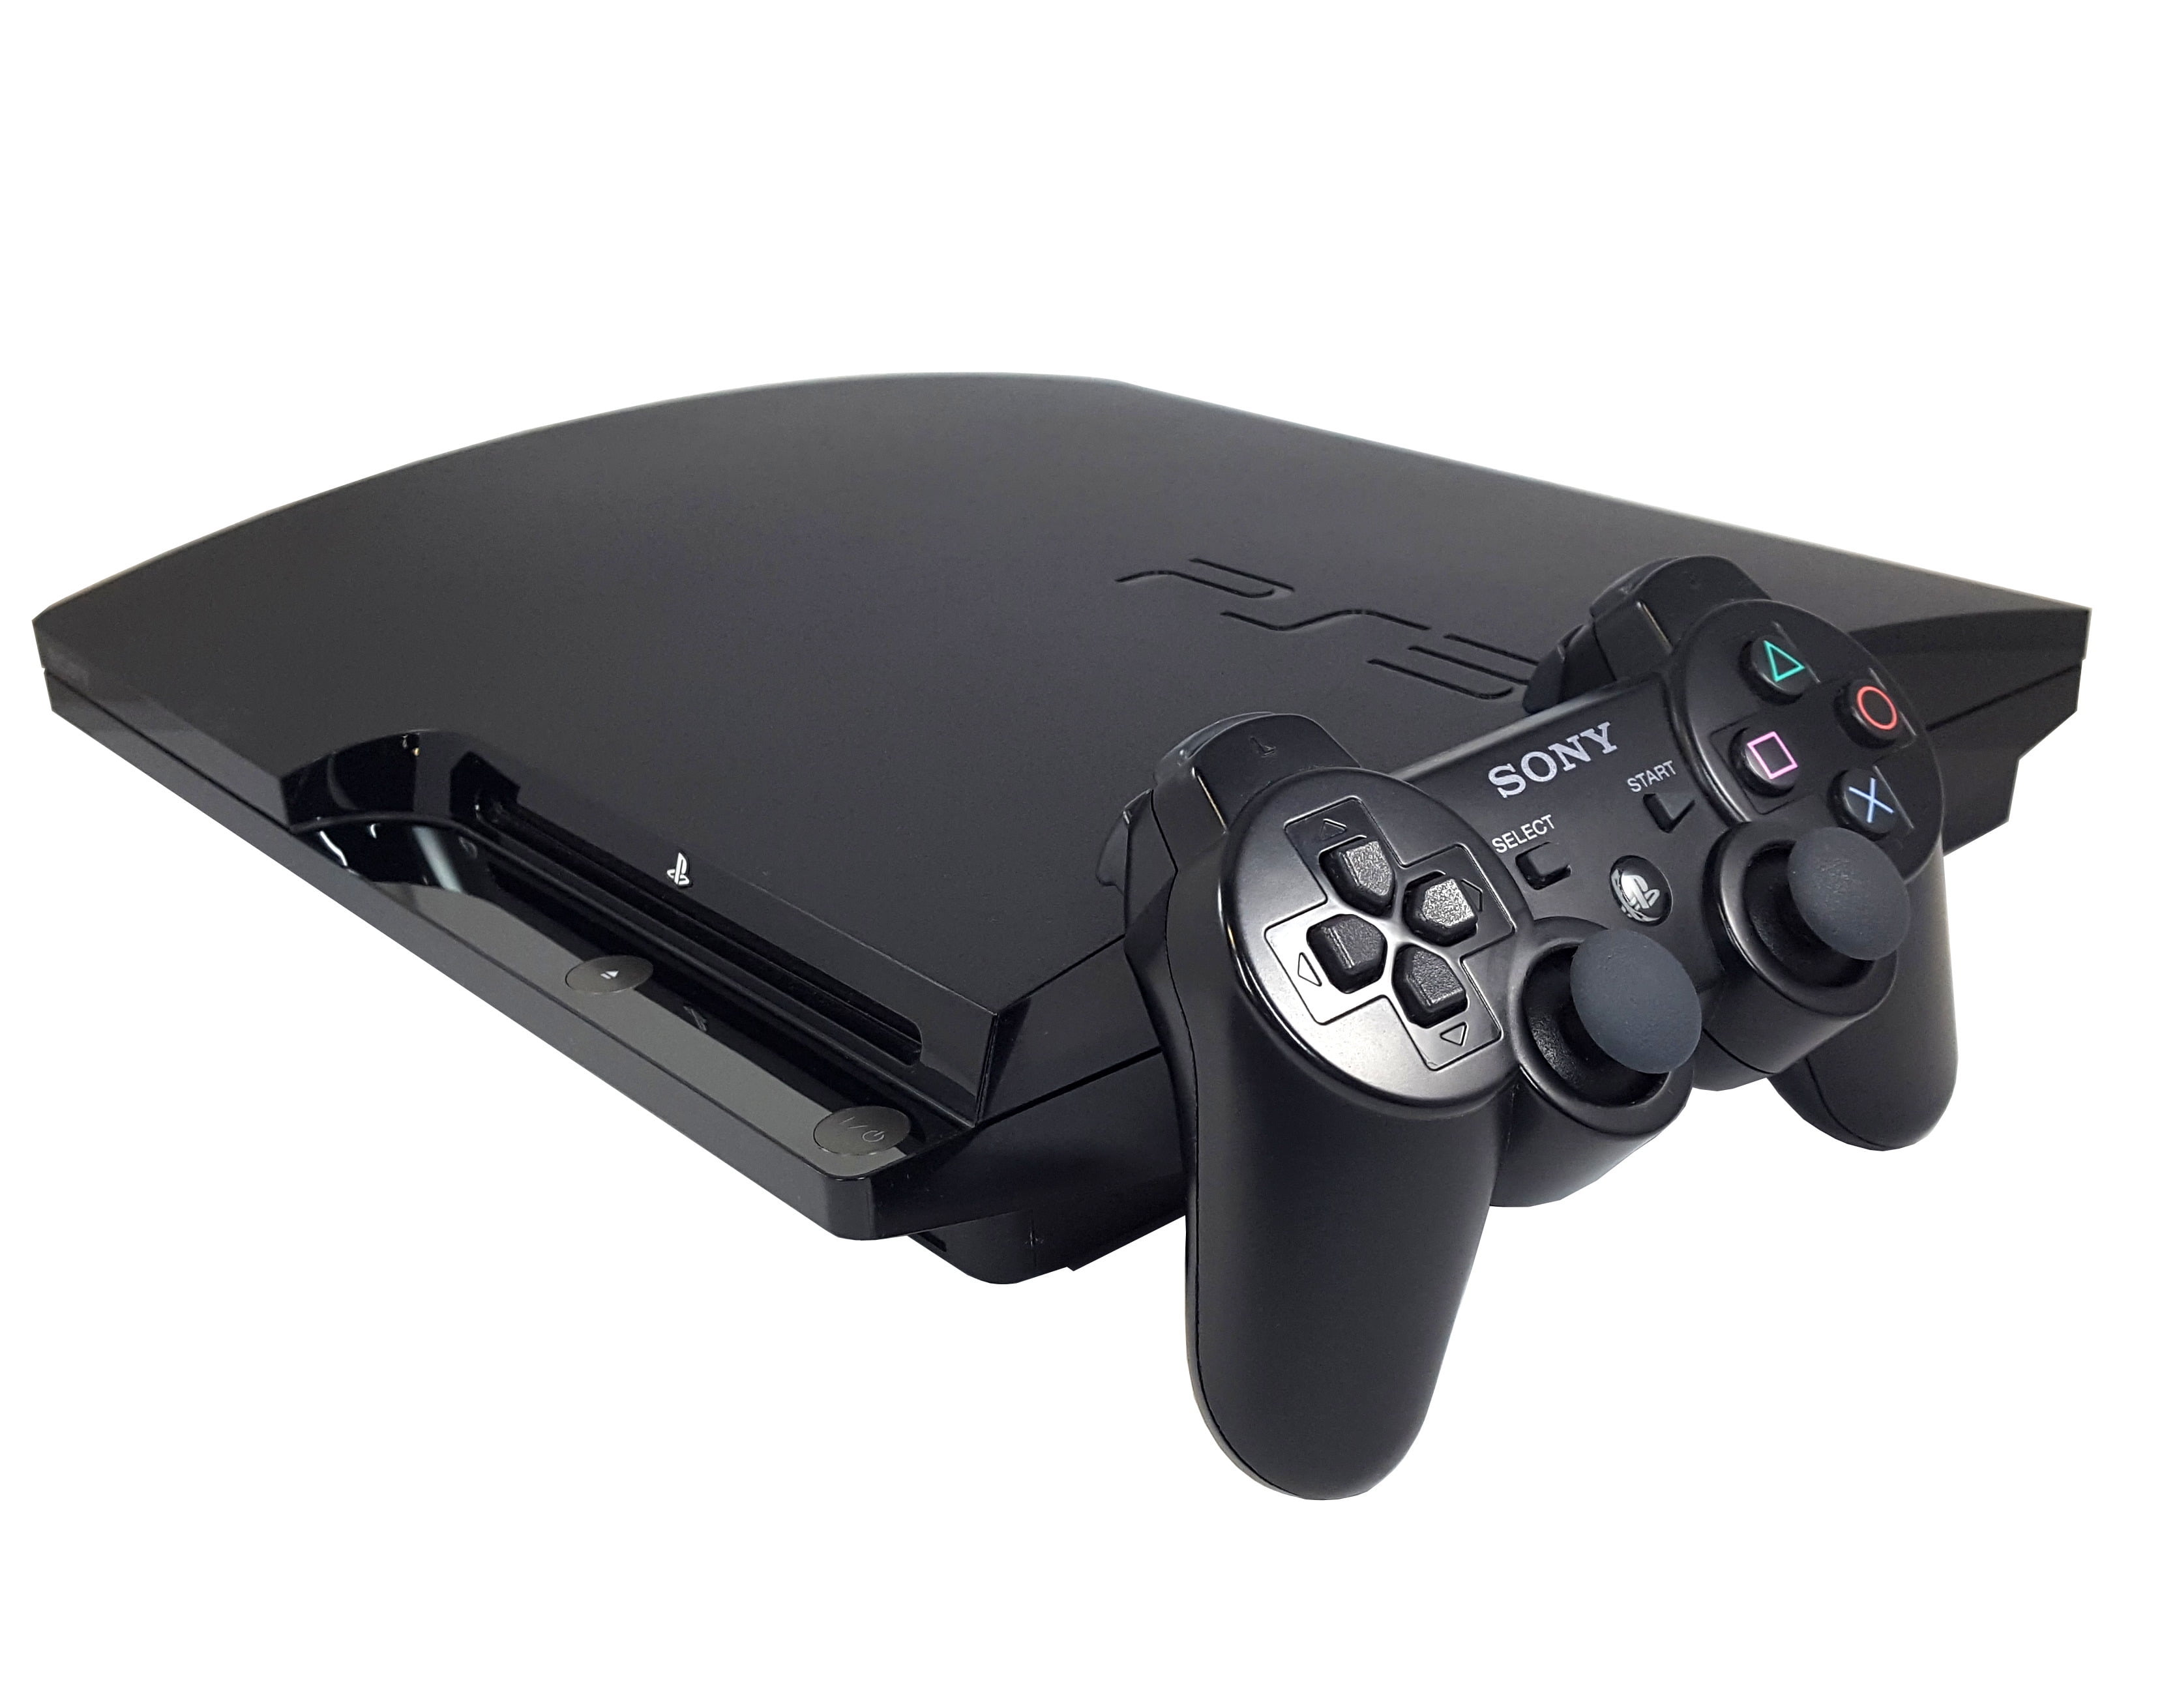 Restored Sony PlayStation 3 PS3 Slim 320GB Game Console Controller with HDMI (Refurbished) - Walmart.com